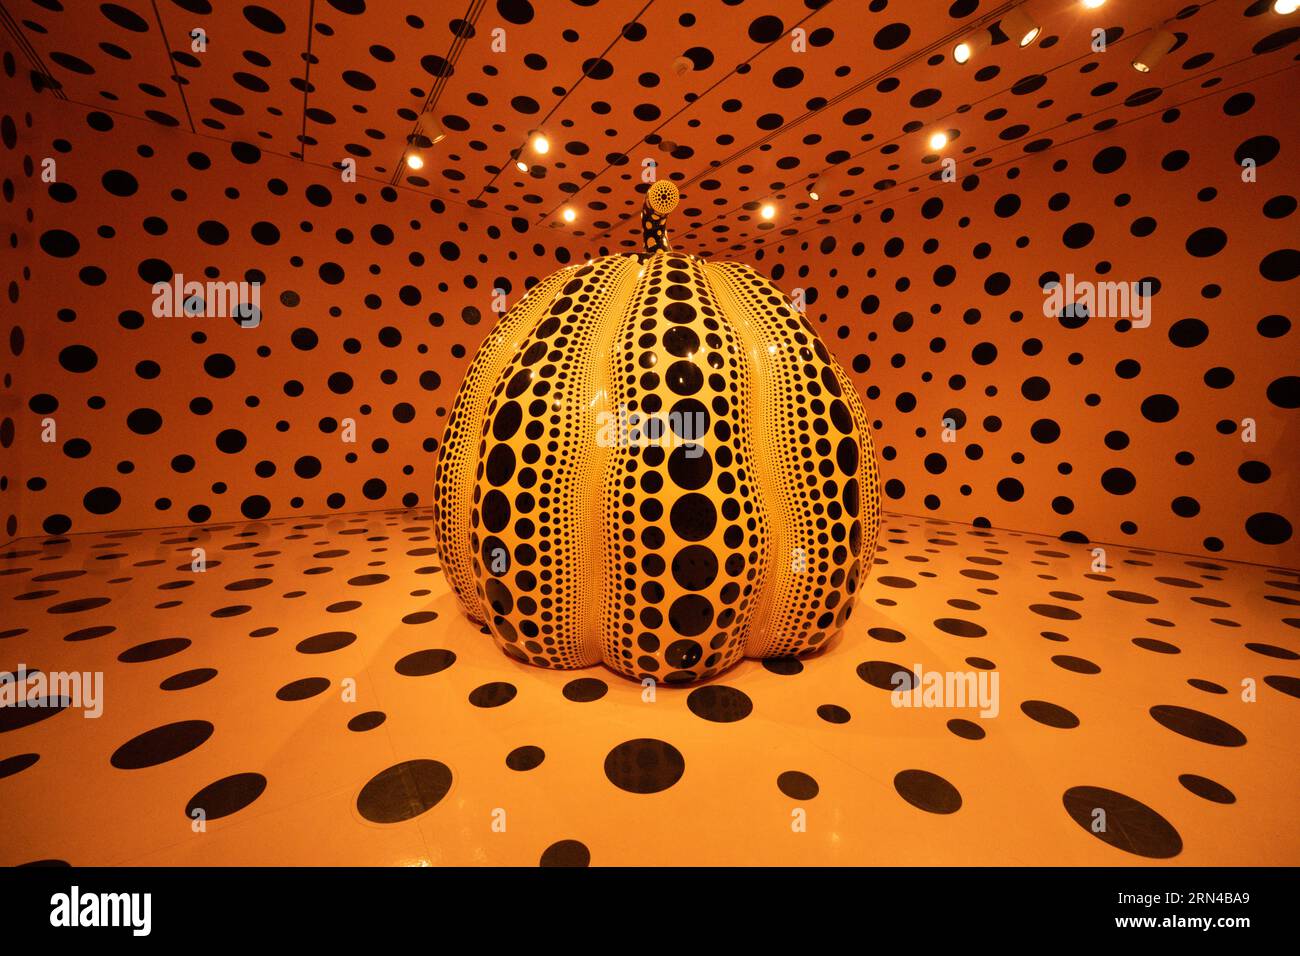 WASHINGTON DC, United States — 'One with Eternity' by Yayoi Kusama graces the halls of the Smithsonian Hirshhorn Museum. This work by the famed Japanese contemporary artist epitomizes her signature style of melding polka dots, mirrors, and infinite space, highlighting the interconnectedness of life and the cosmos. Stock Photo